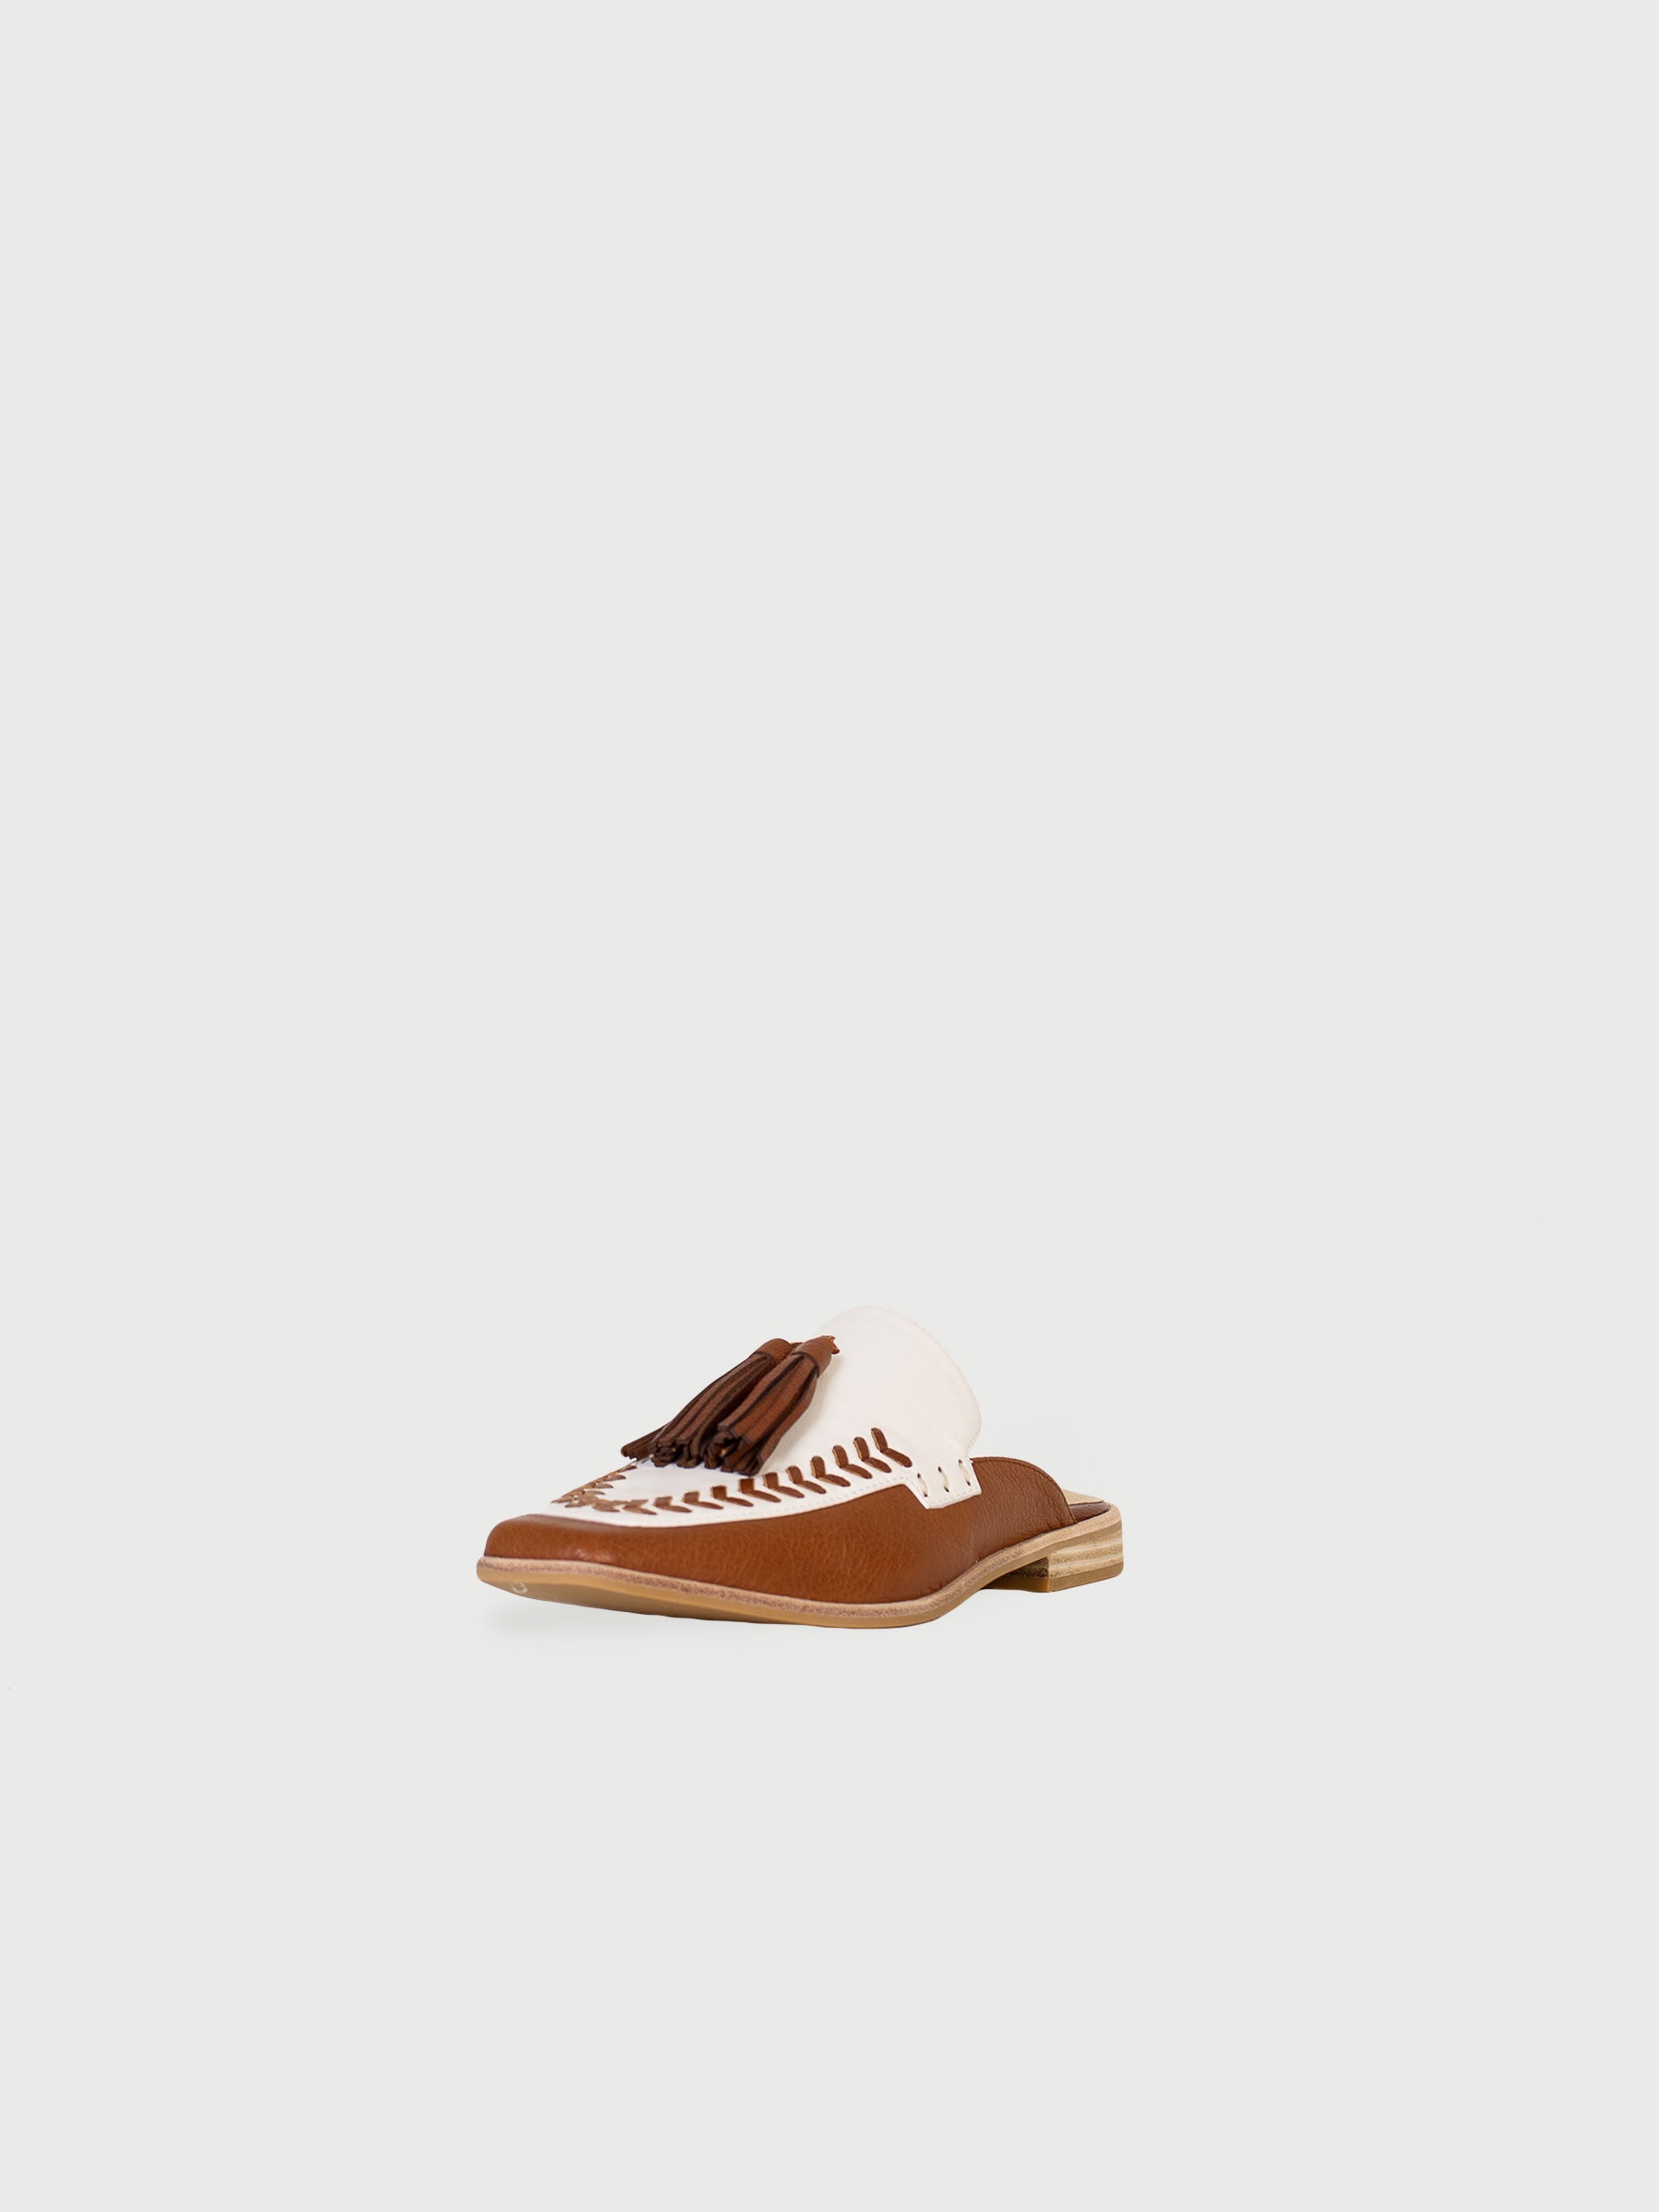 Square-Toe Woven-Leather Mules with Tassels